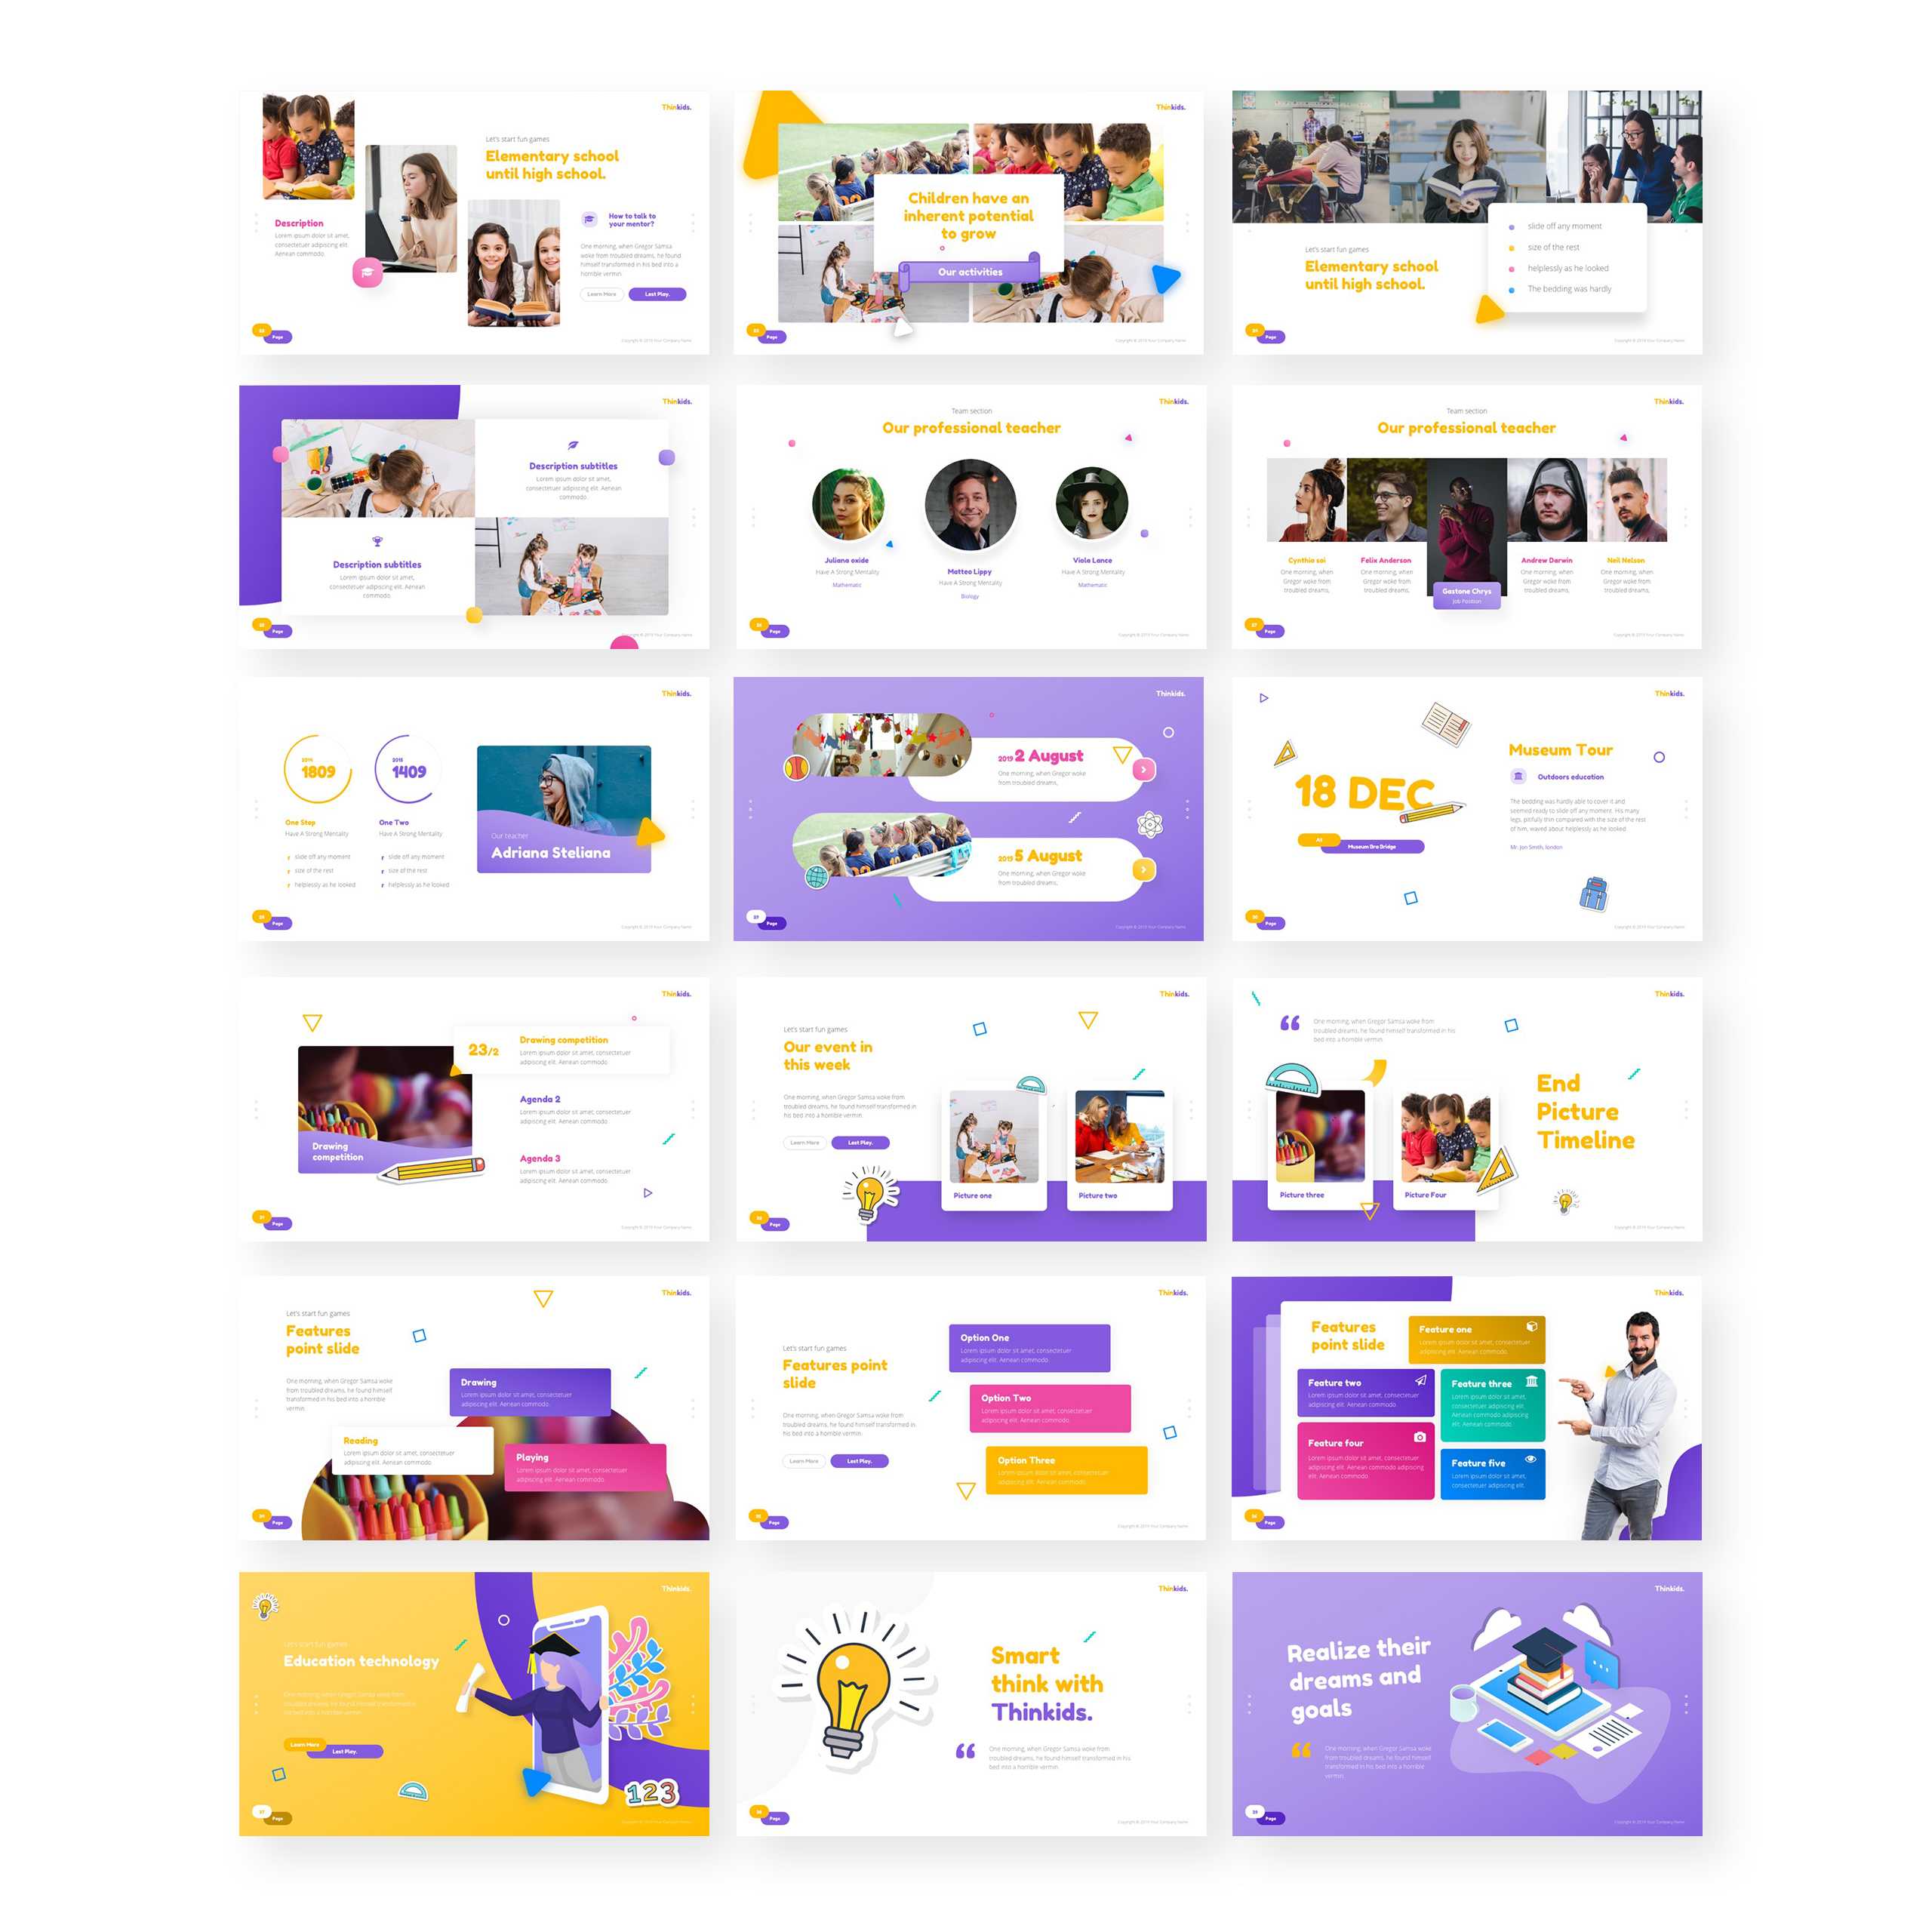 Thinkids – Fun Games & Education Powerpoint Template Throughout Powerpoint Template Games For Education